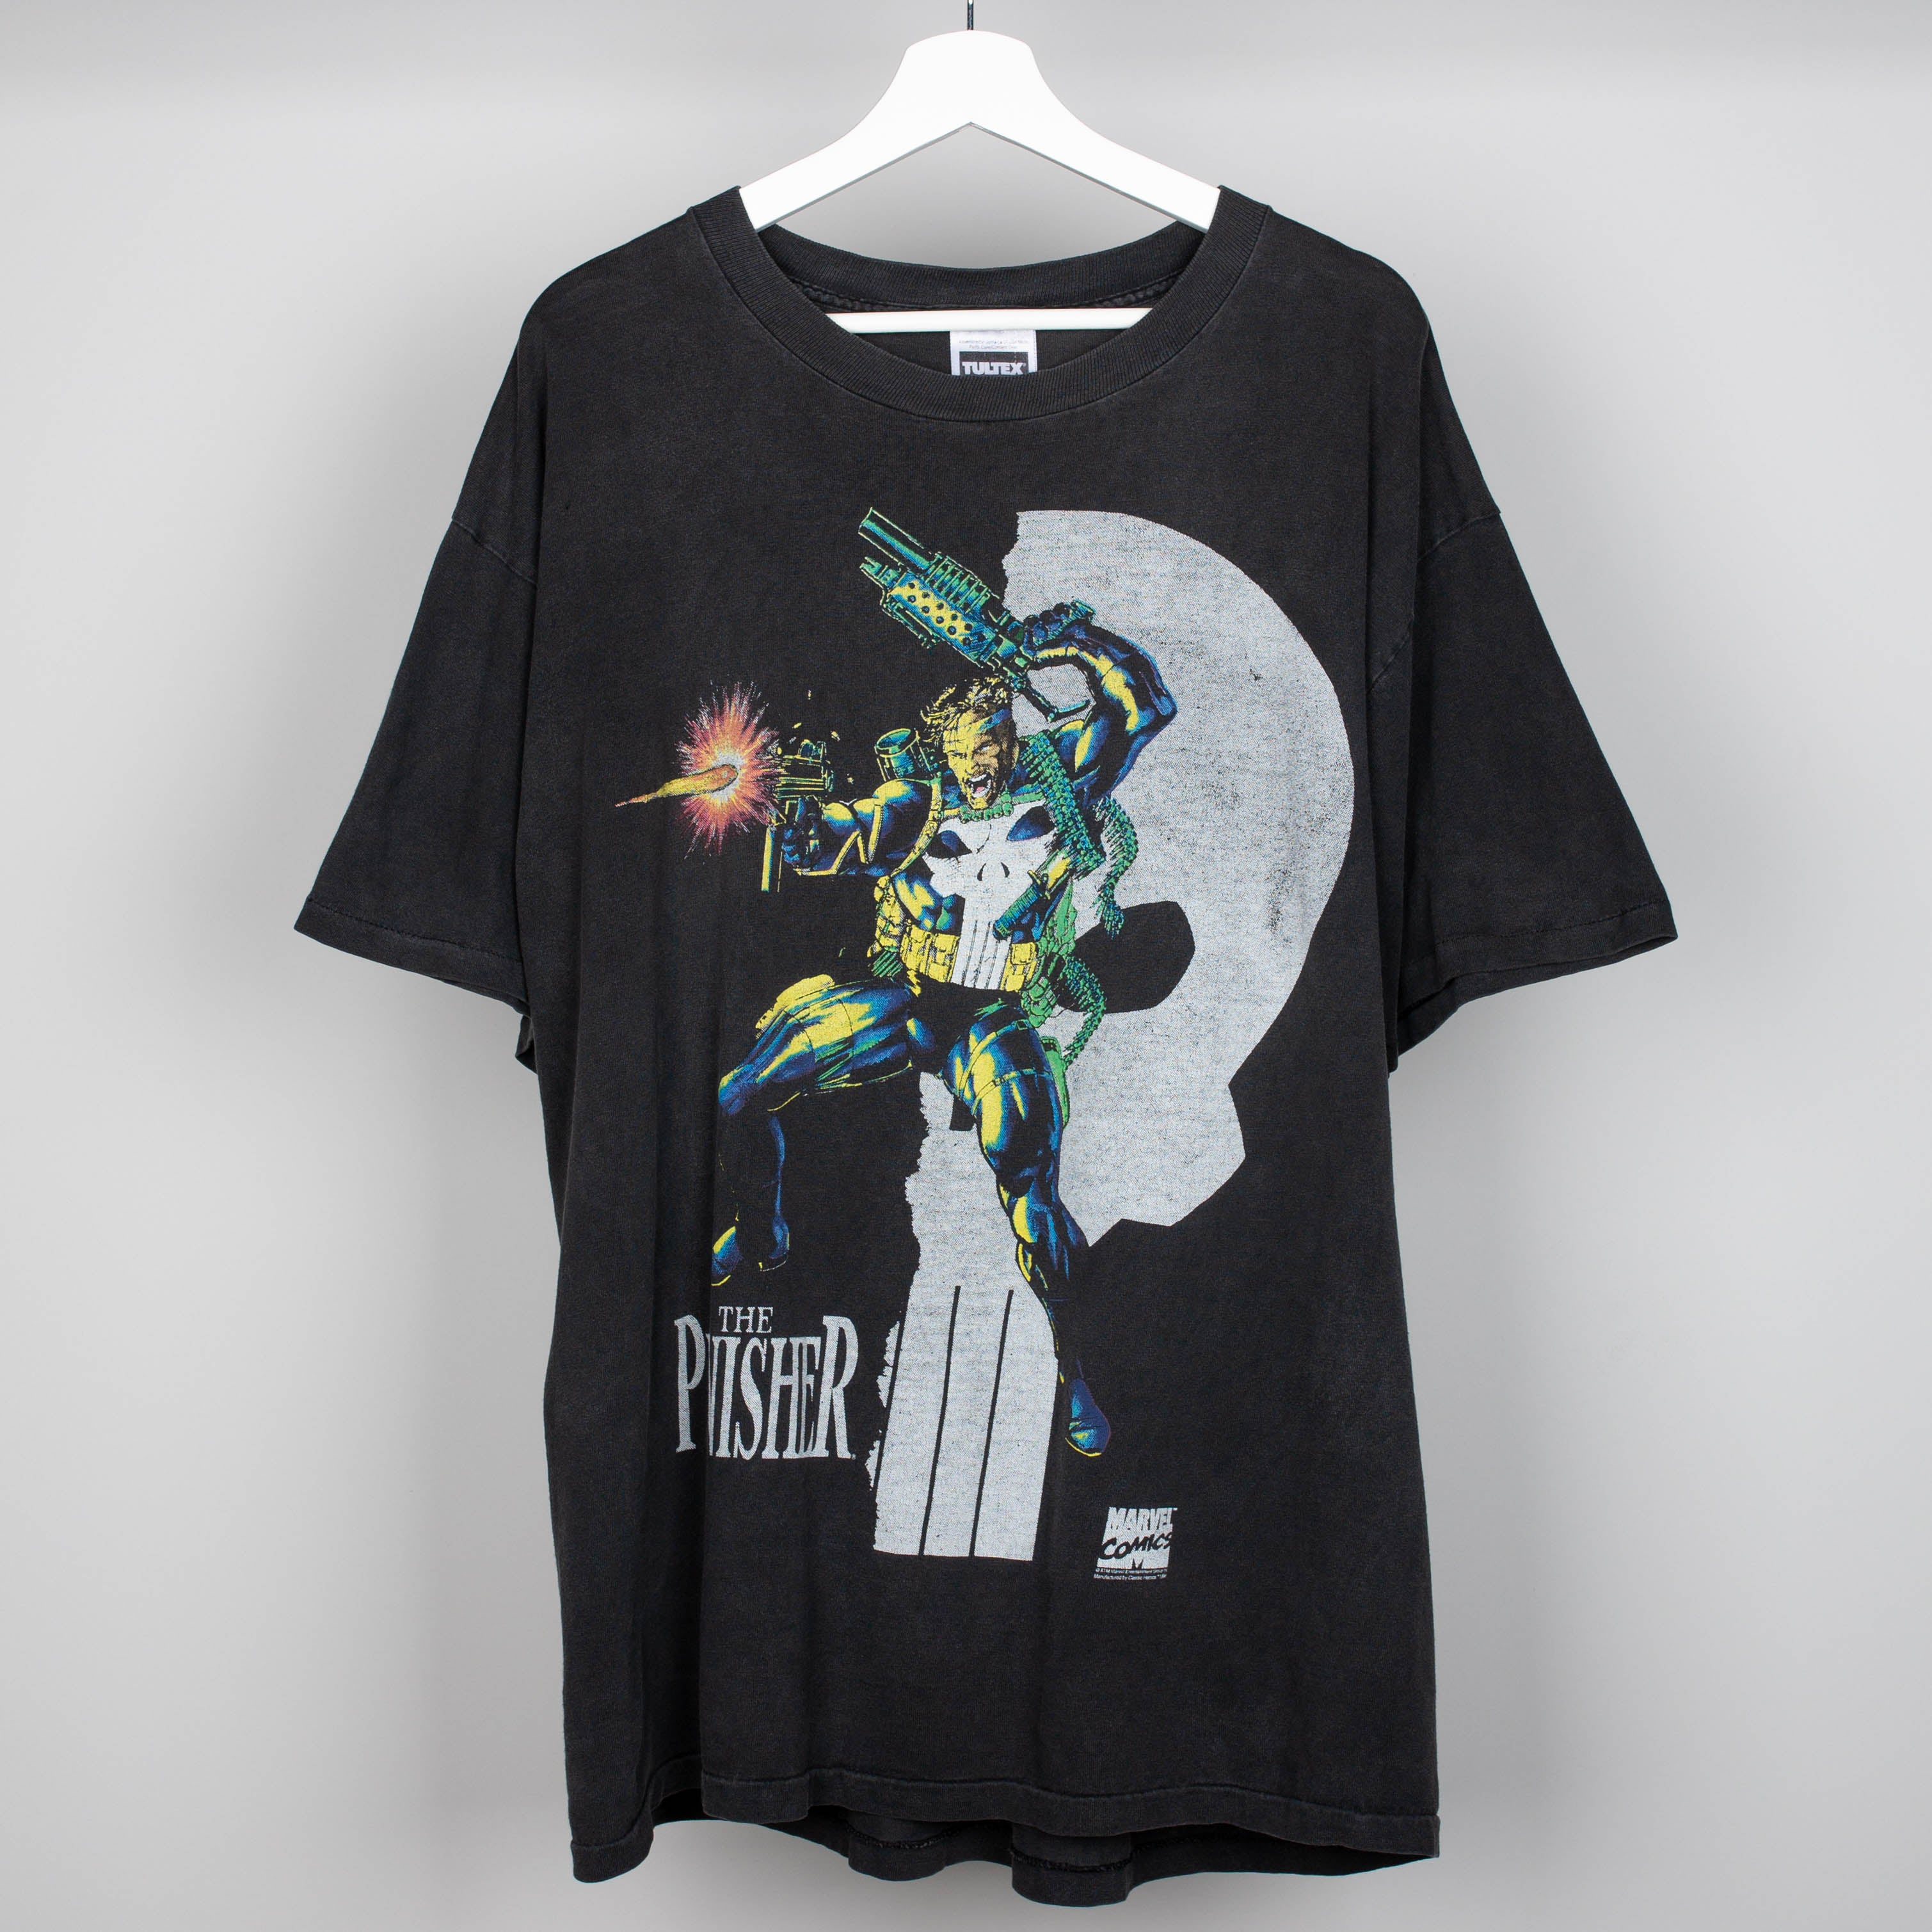 The Marvel XL Grails Size Threaded Comics – punisher 1994 T-Shirt